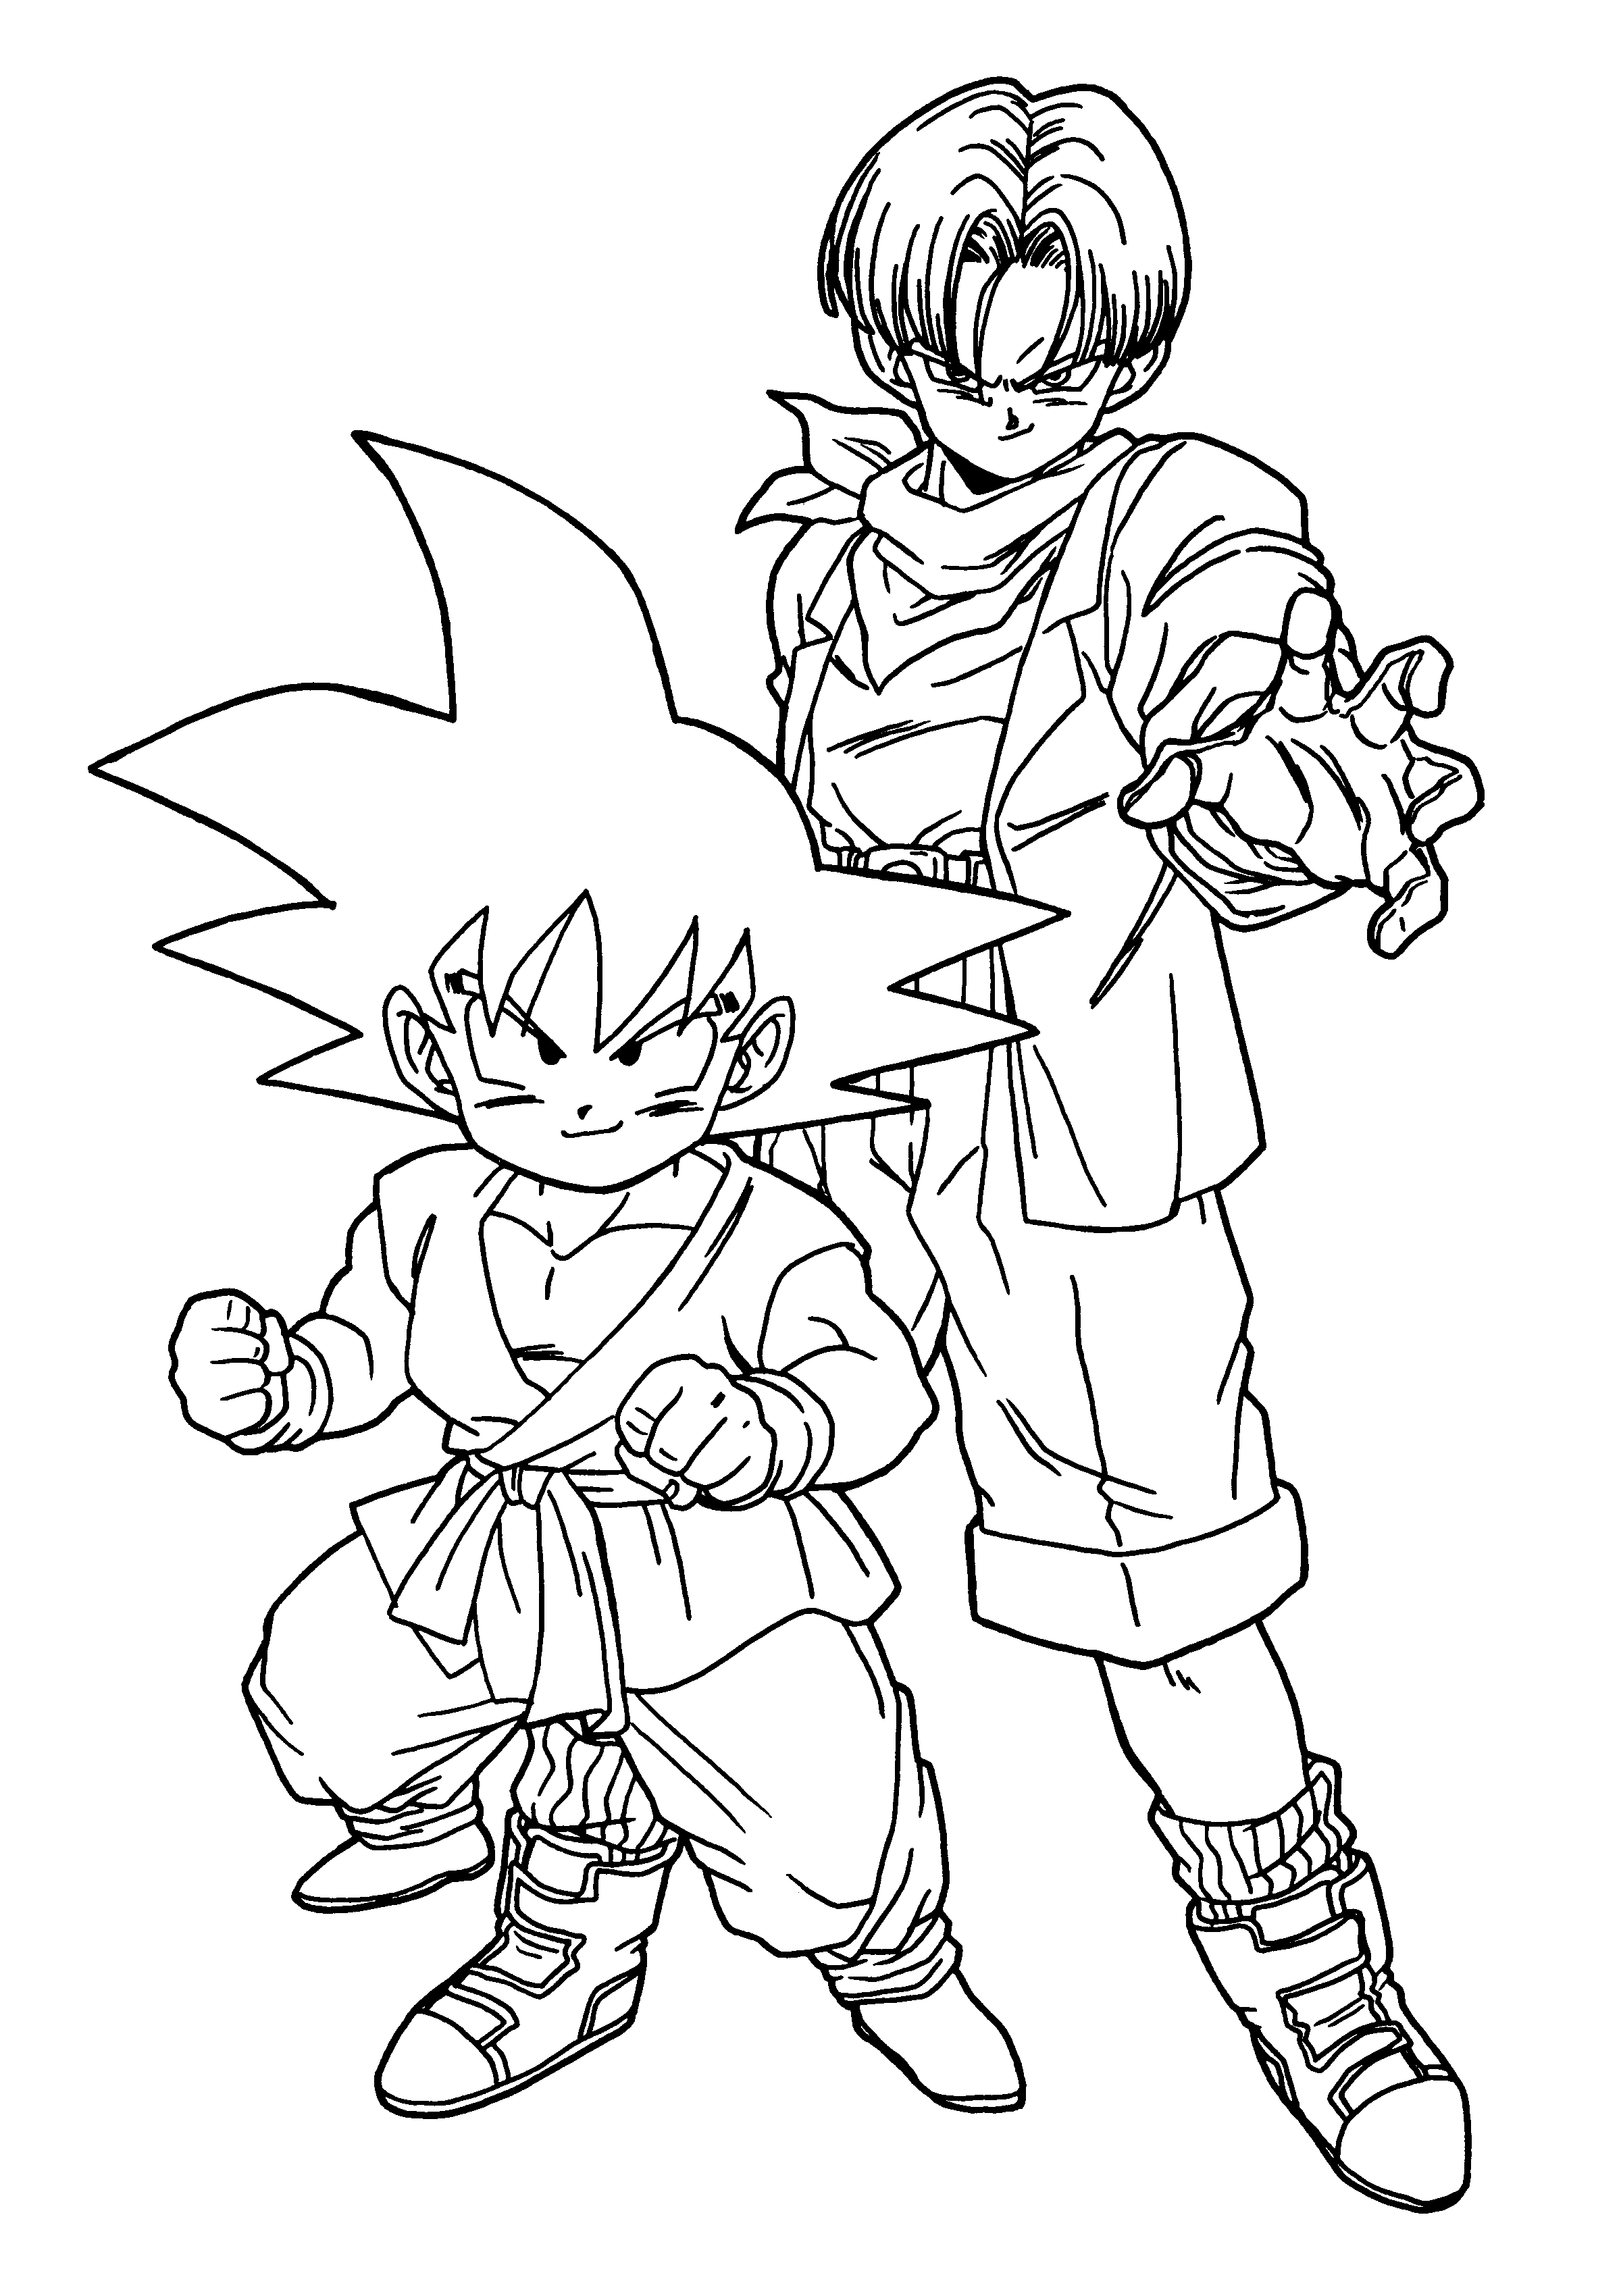 dbz colouring pages dragon ball coloring pages best coloring pages for kids pages dbz colouring 